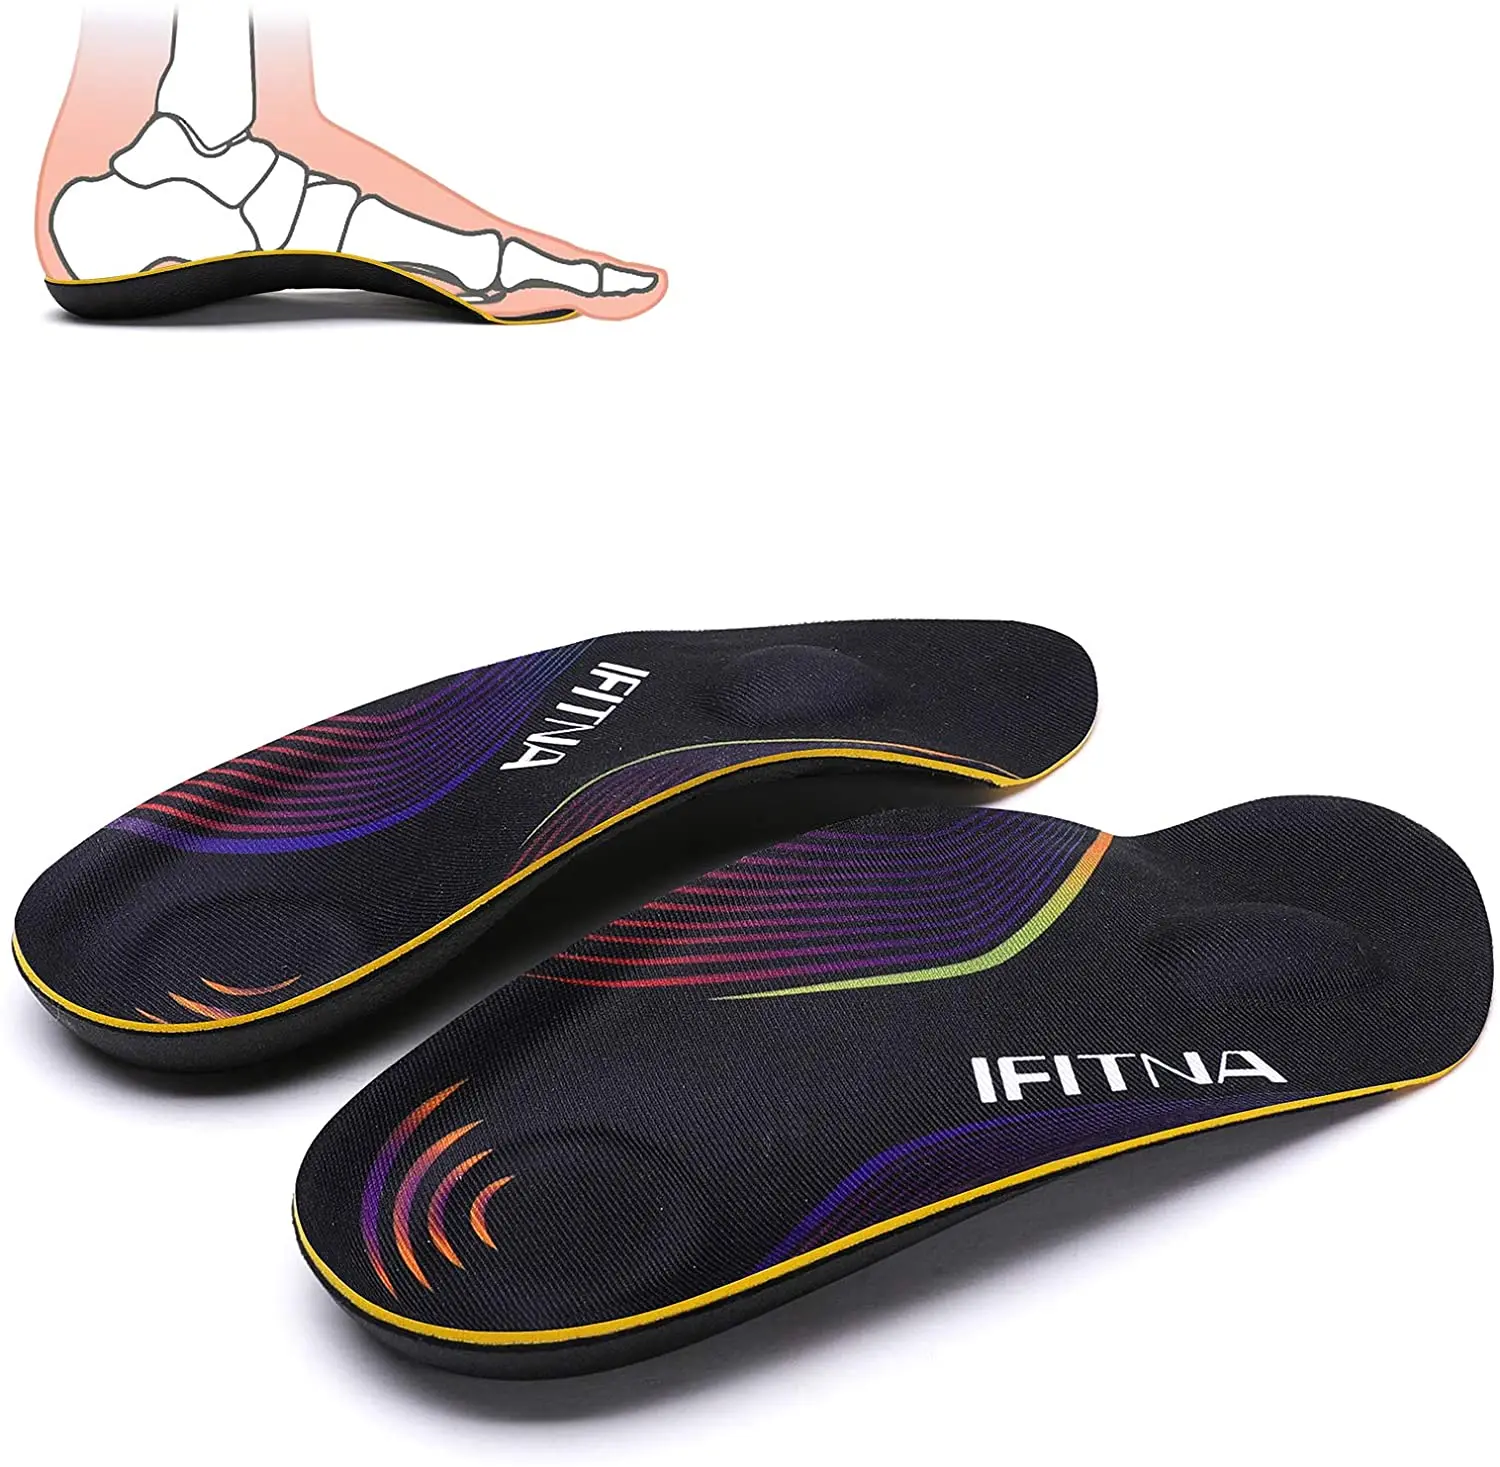 Orthotics Arch Support Insert 3/4 Shock-Absorbing Insoles for Plantar Fasciitis, Flat Feet, Relief Heel Spur Pain